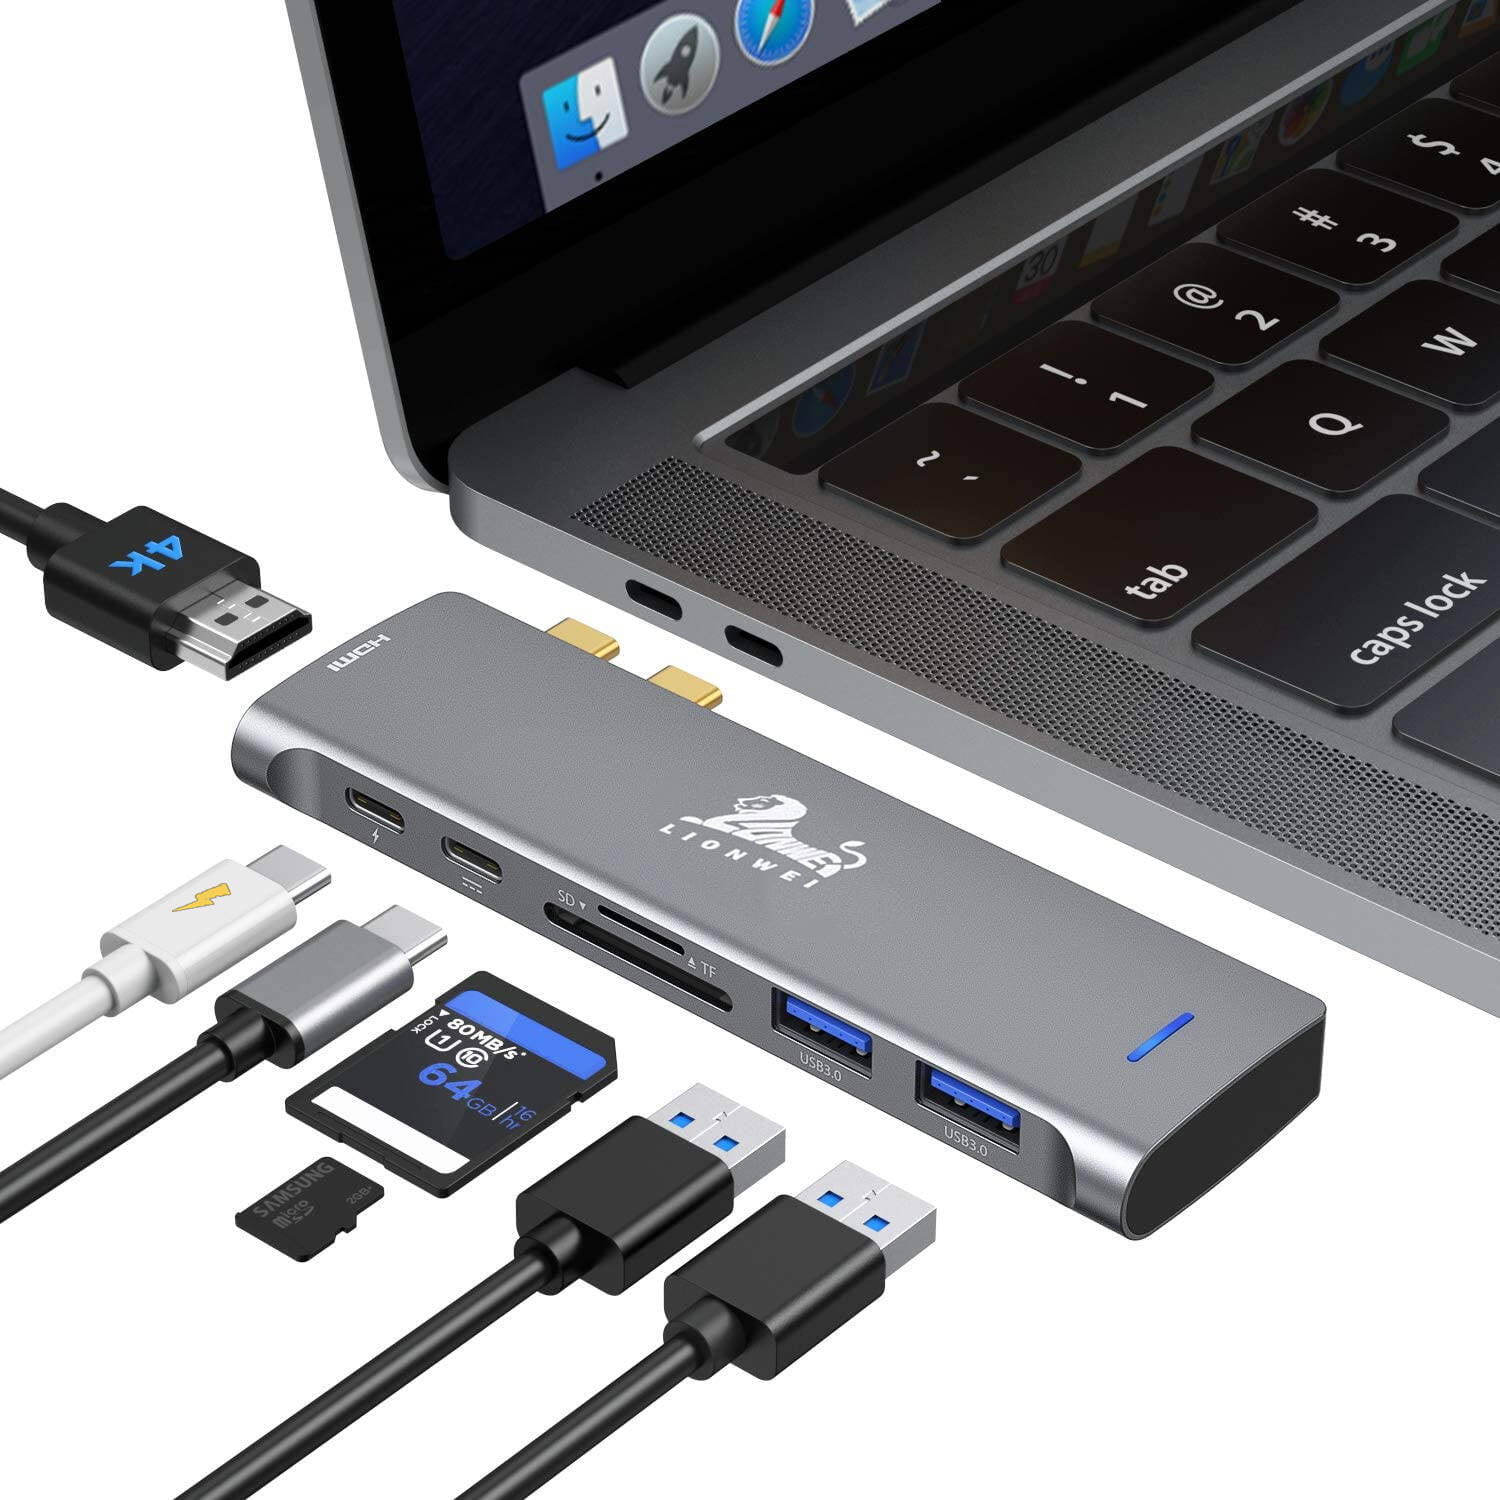 Dell Type C USB 3.0 Hub PD Charging Adapter for MacBook Air/Pro 13/15 2019-2016 